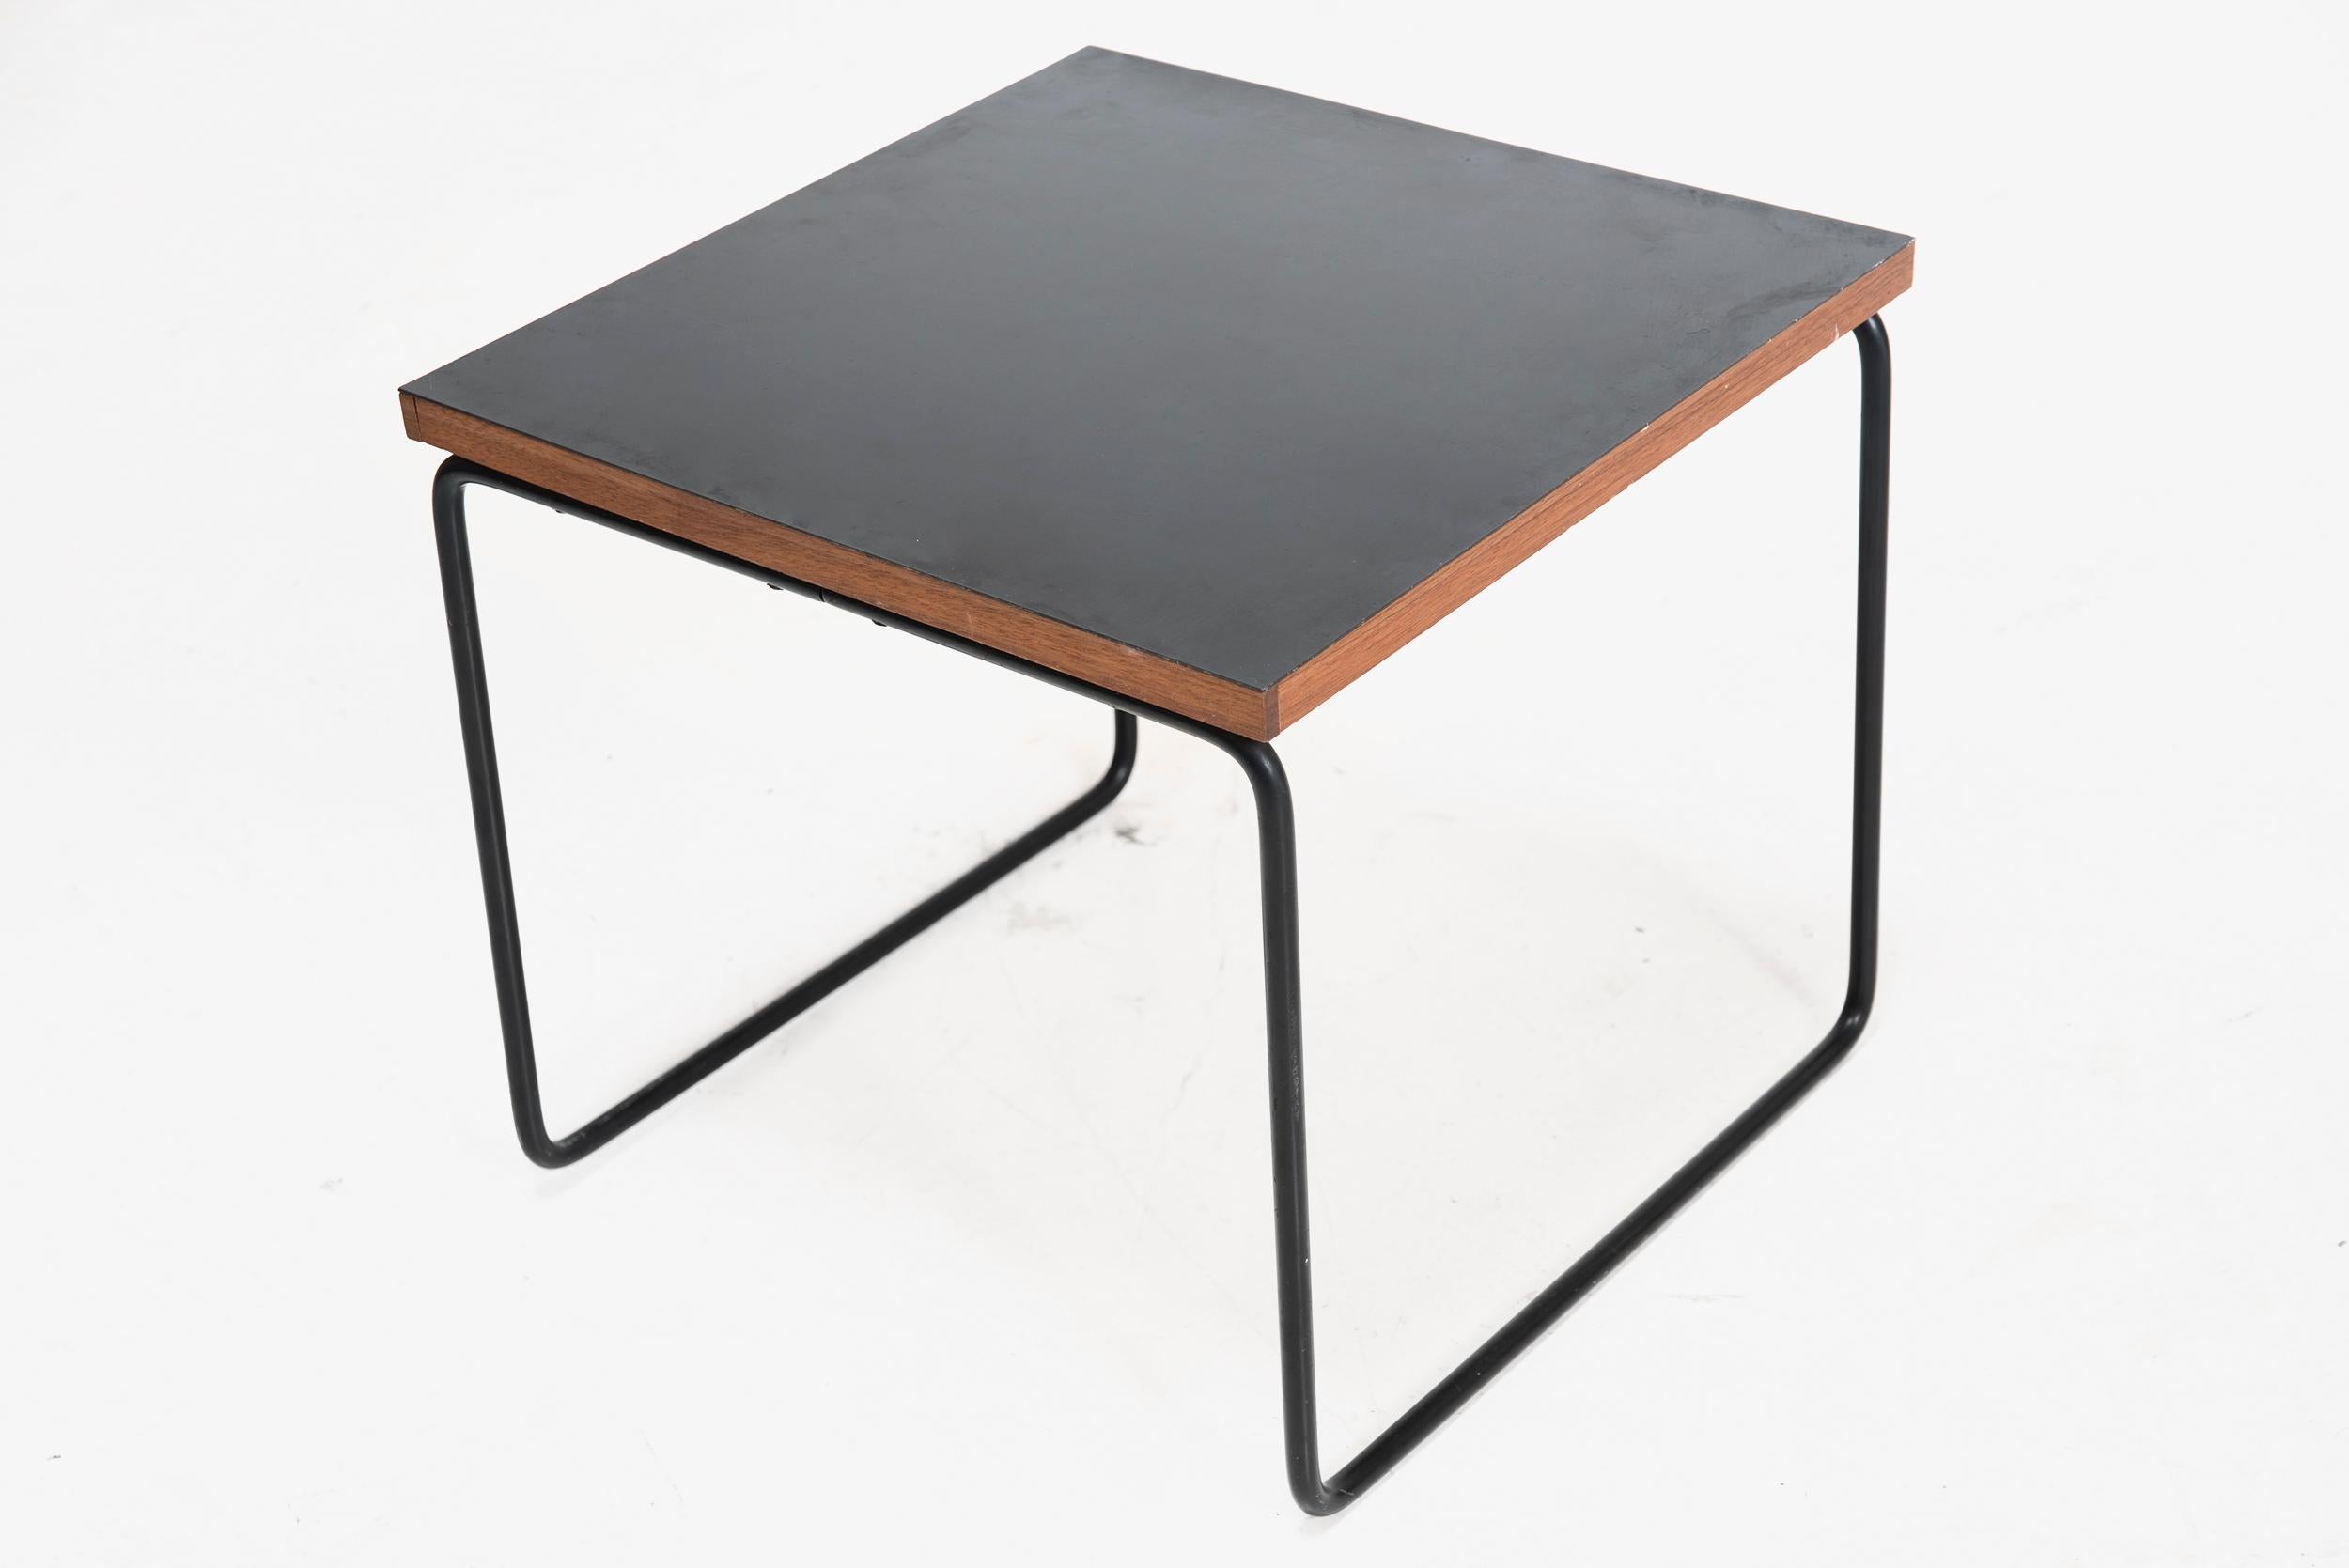 Pierre Guariche (1926–1995)

Side table
Manufactured by Steiner
France, 1950s
Metal, formica

Measurements
39 cm x 39 cm x 36h cm
15.36 in x 15.36 in x 14.18 in

Provenance
Private collection, France

Biography
The architect Pierre Guariche was one